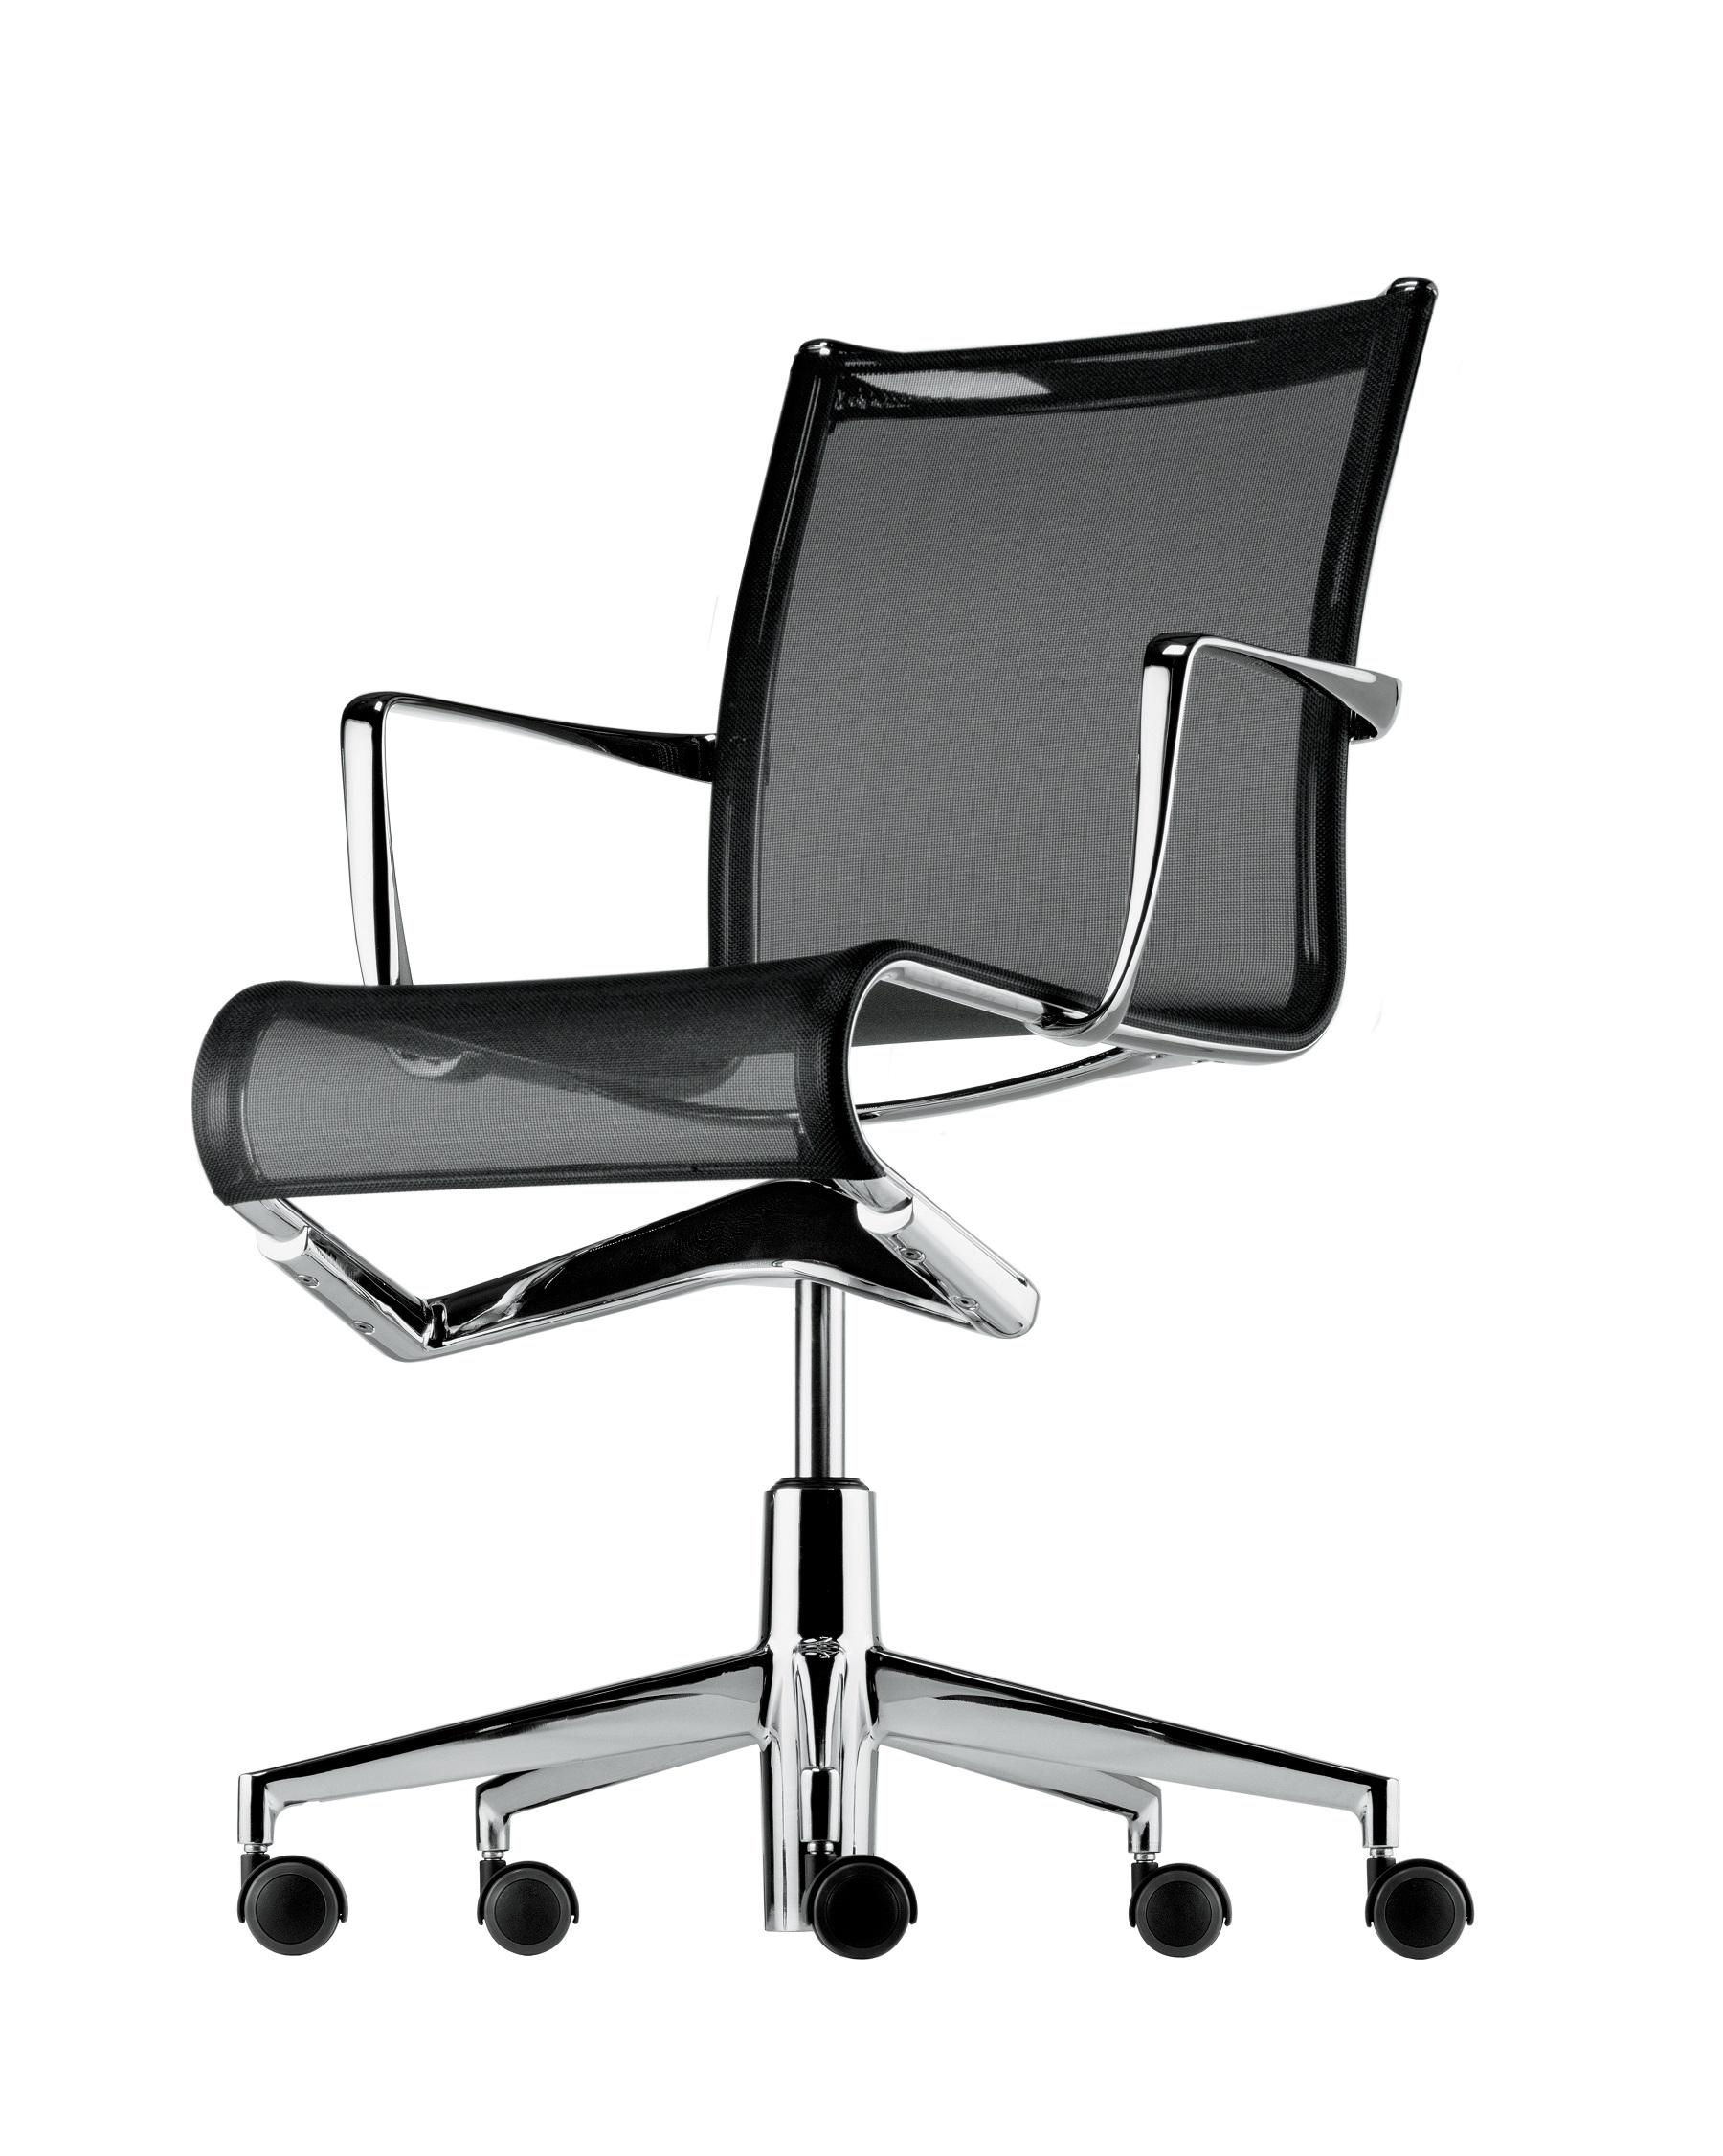 Alias 434 Rollingframe 44 Chair Black Mesh with Chromed Aluminum Frame by Alberto Meda

Height adjustable chair with arms, with soft (or hard or soft breaking ***) castors and 5-star swivel base. Structure made of extruded aluminium profile and